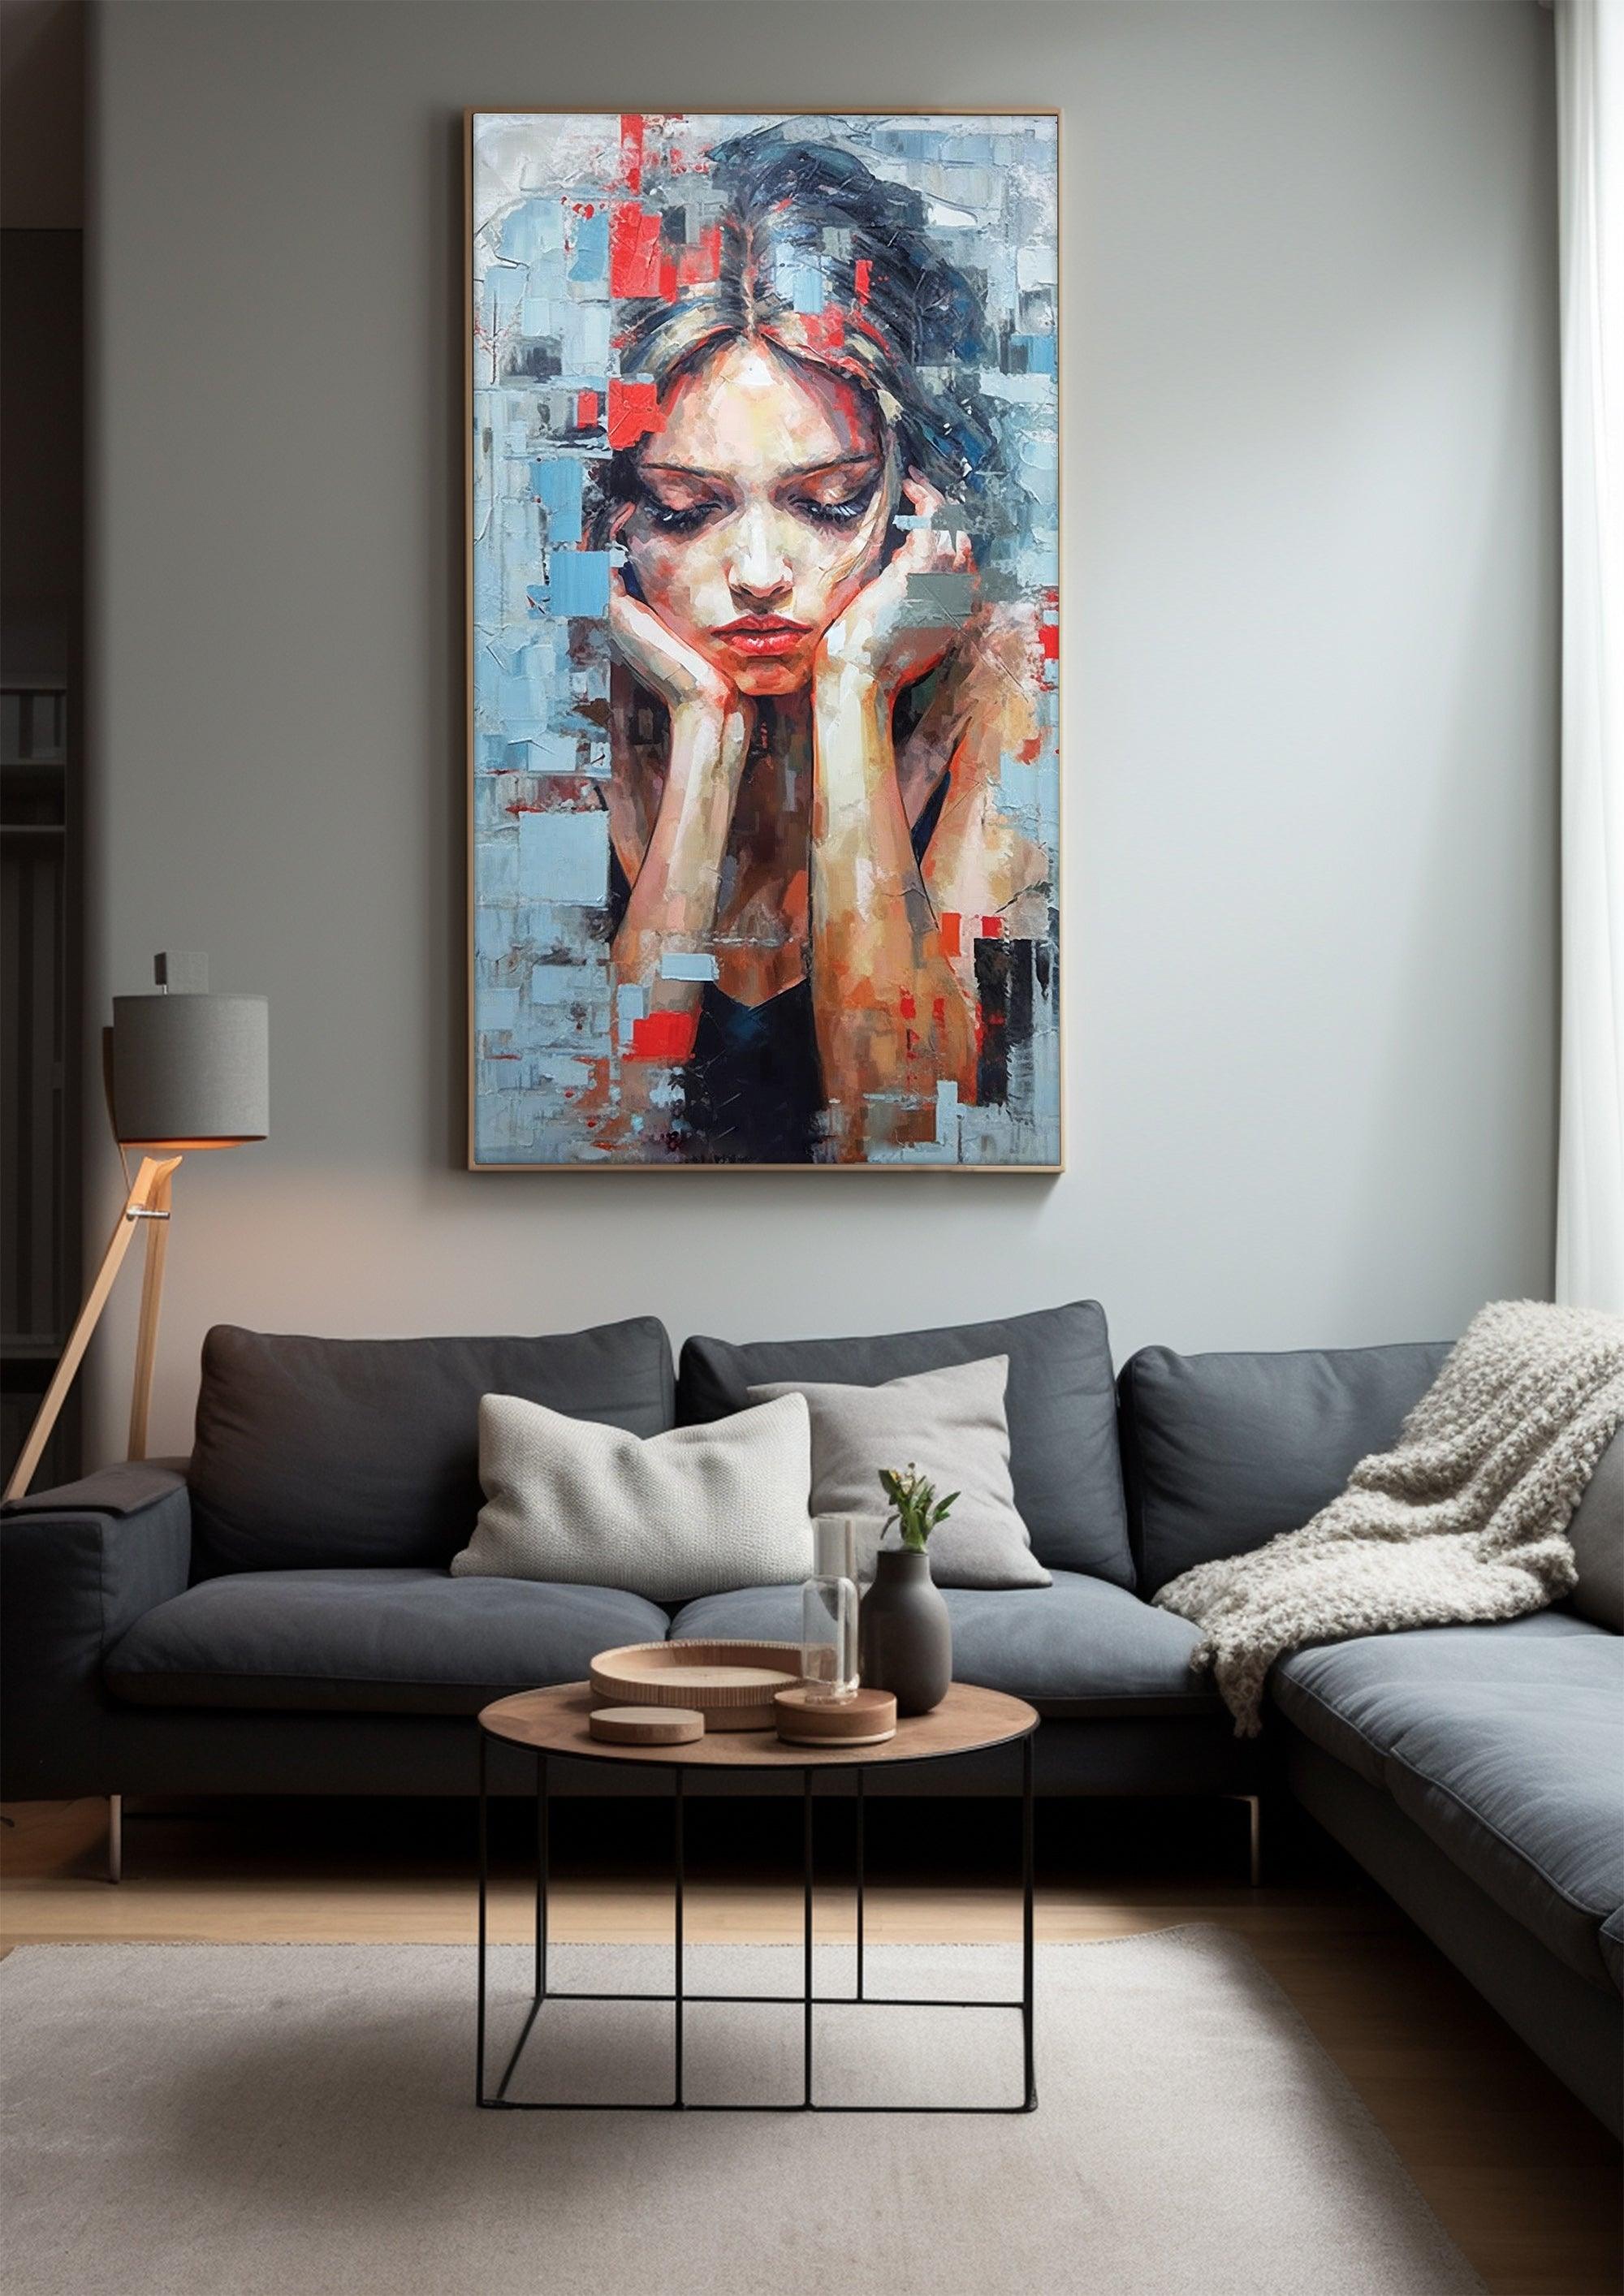 Woman Portrait，Hand Painted Colorful Decorative Canvas Artwork，Moody Wall Decor，Cotton Gloss Canvas Living Room Decor，High-Quality Waterproof Decorative Canvas Art